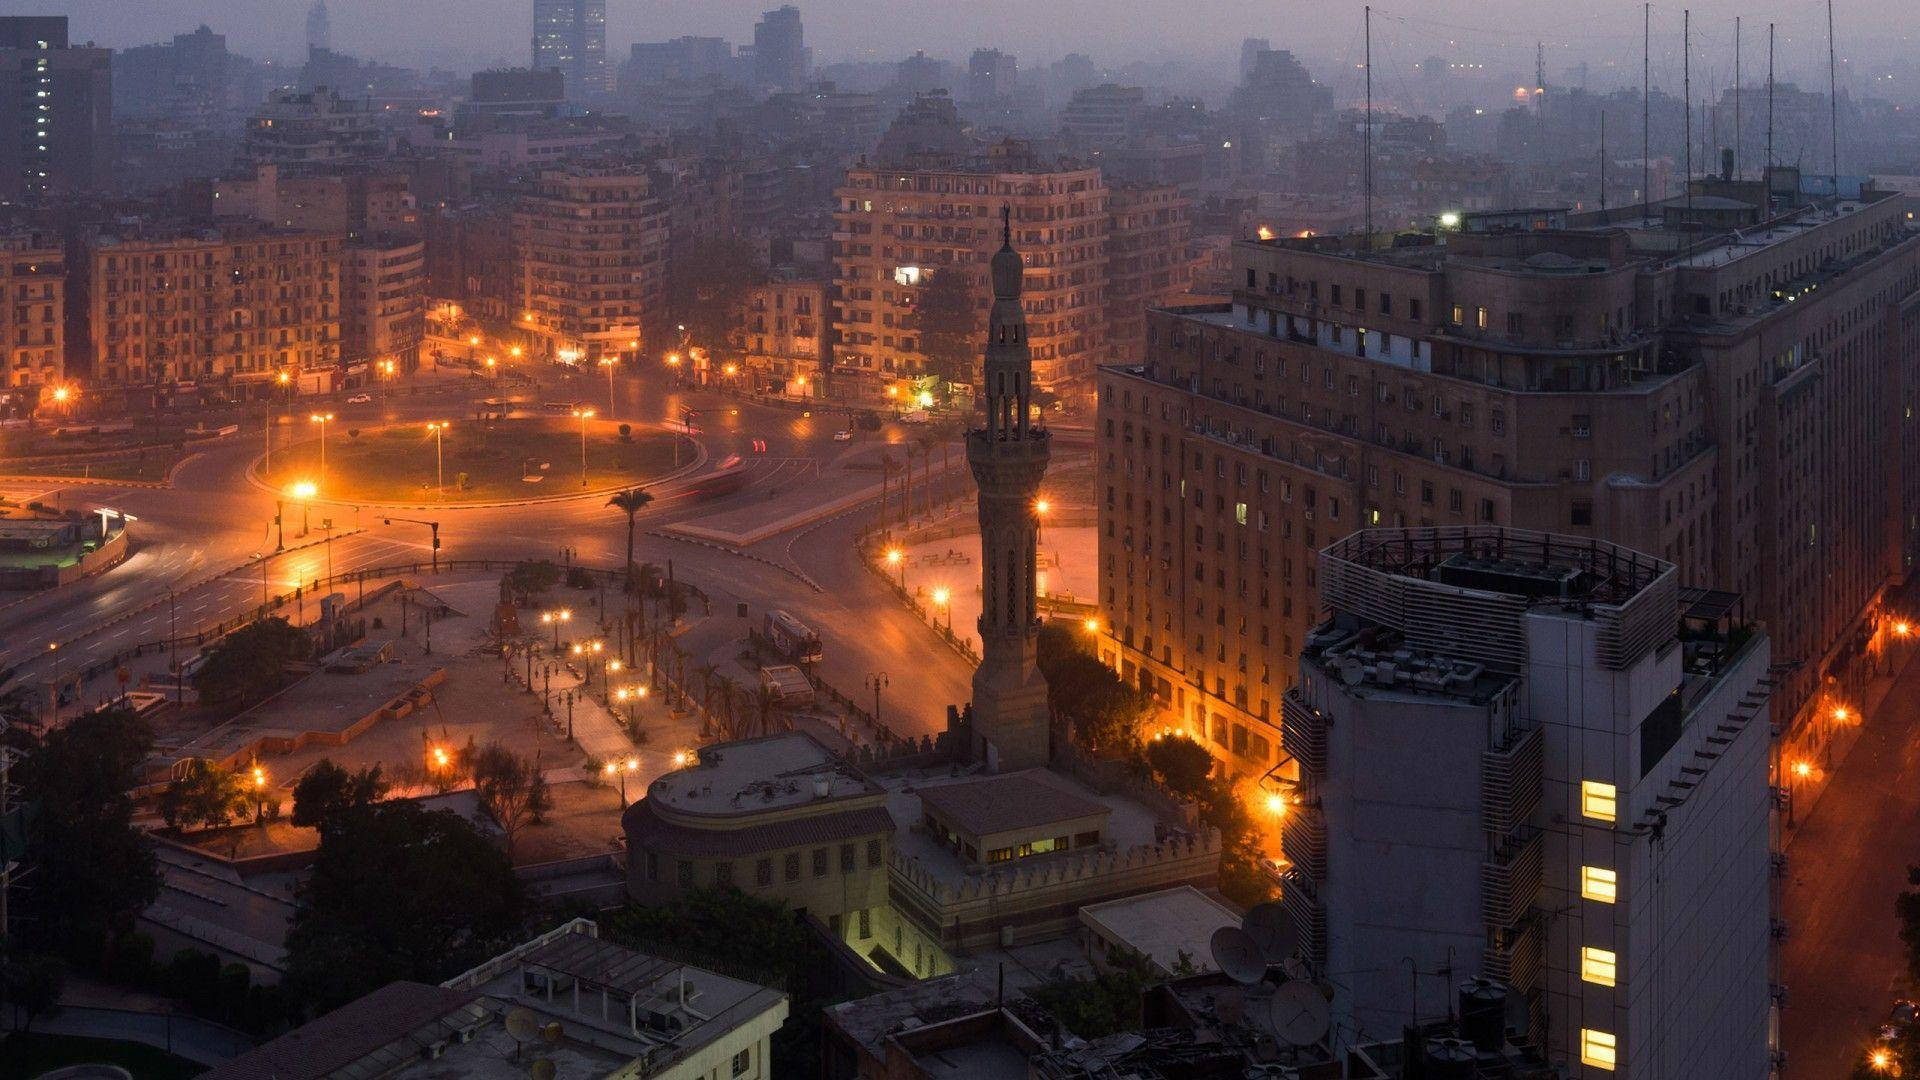 Cairotahrir Square Can Be Translated To Spanish As 